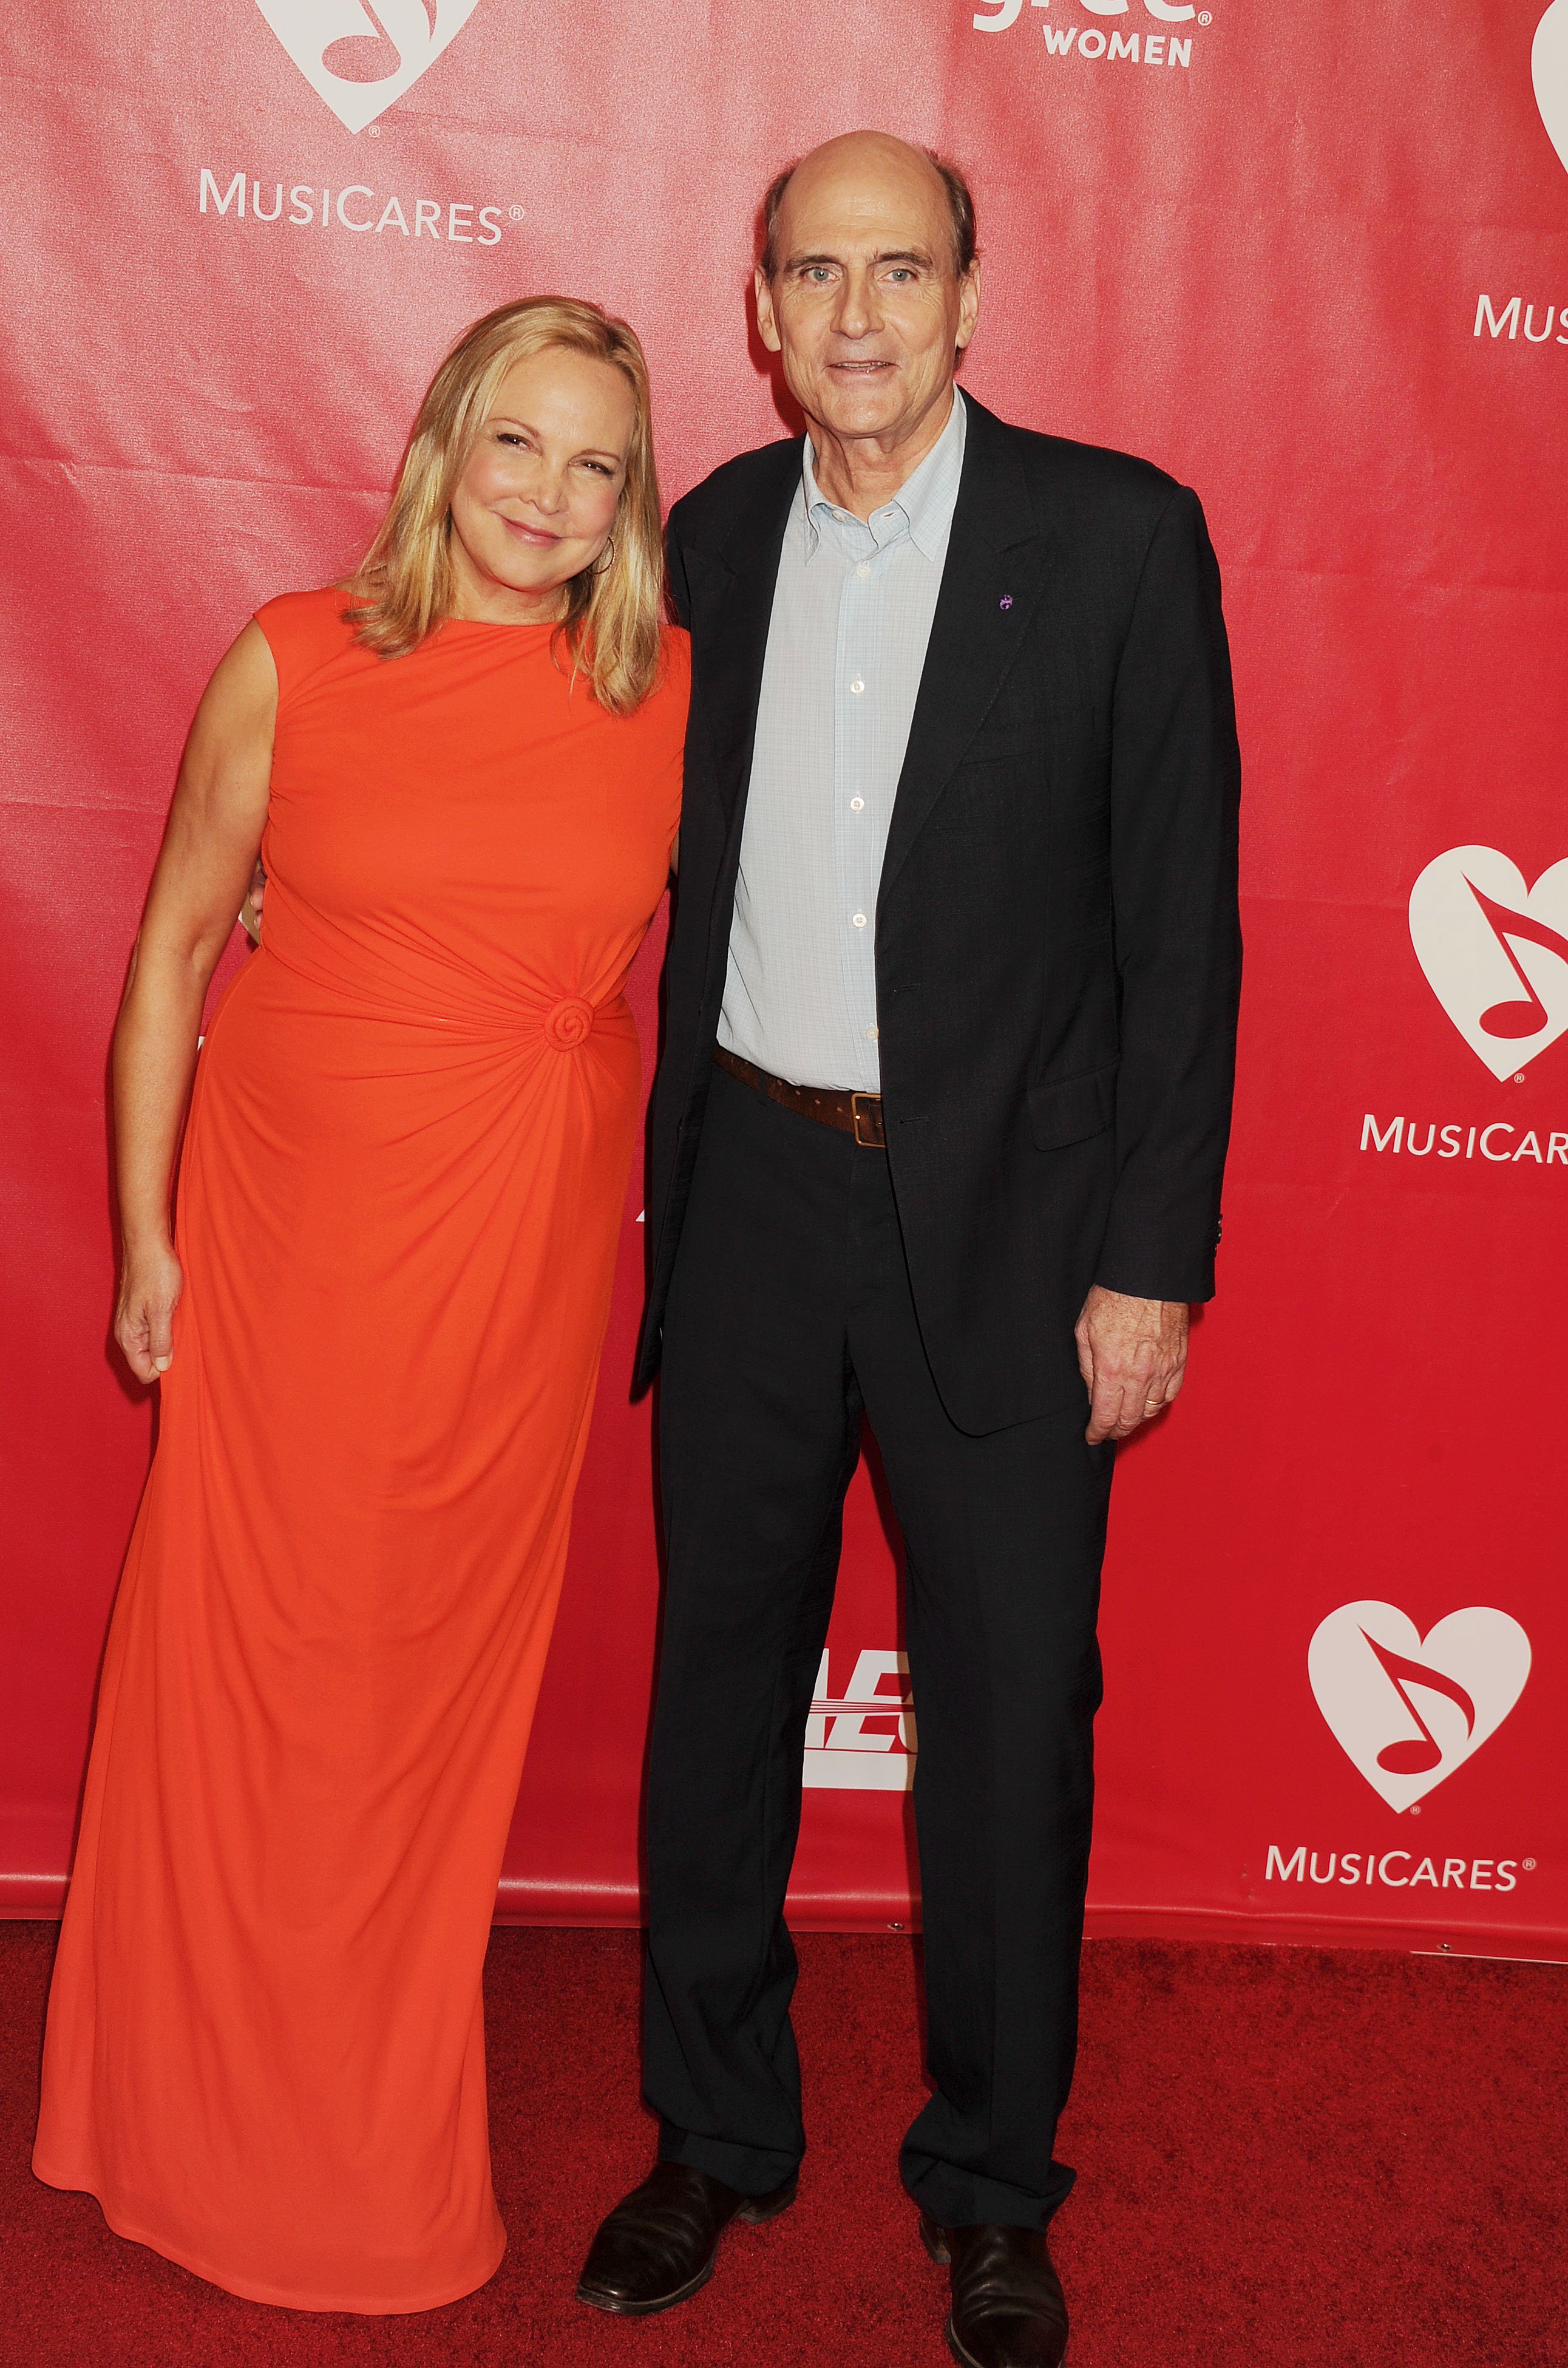 James Taylor and his wife, Caroline Smedvig, at an event on April 17, 2014, in New York City | Source: Getty Images